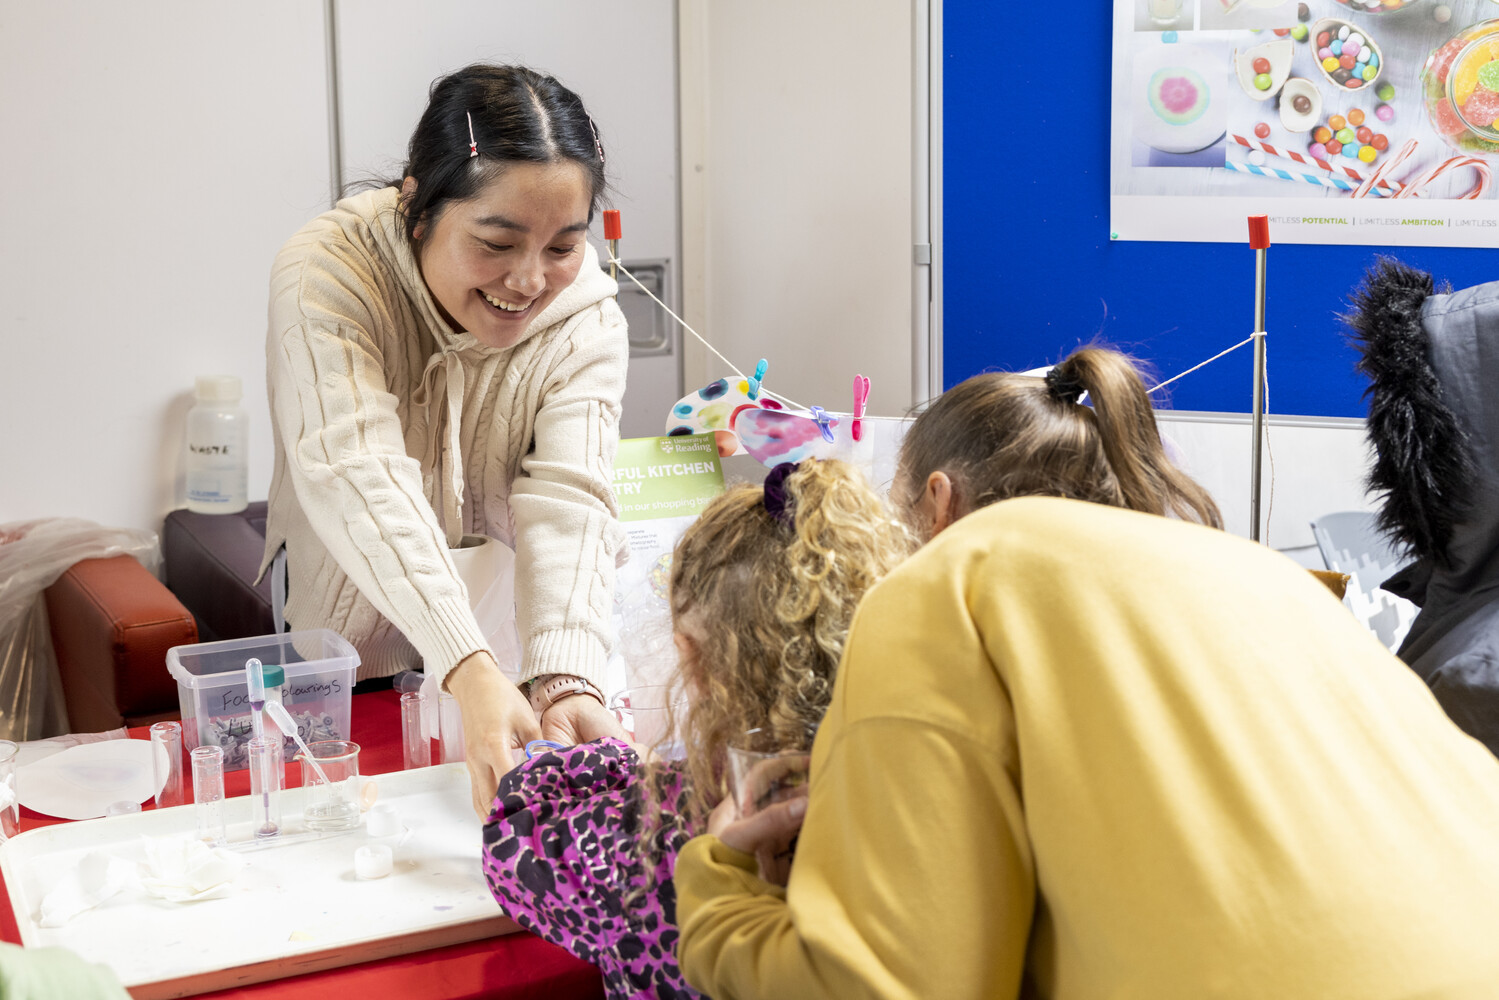 a researcher at the 2023 Community Festival engages with a child and their parents with pipettes and scientific equipment